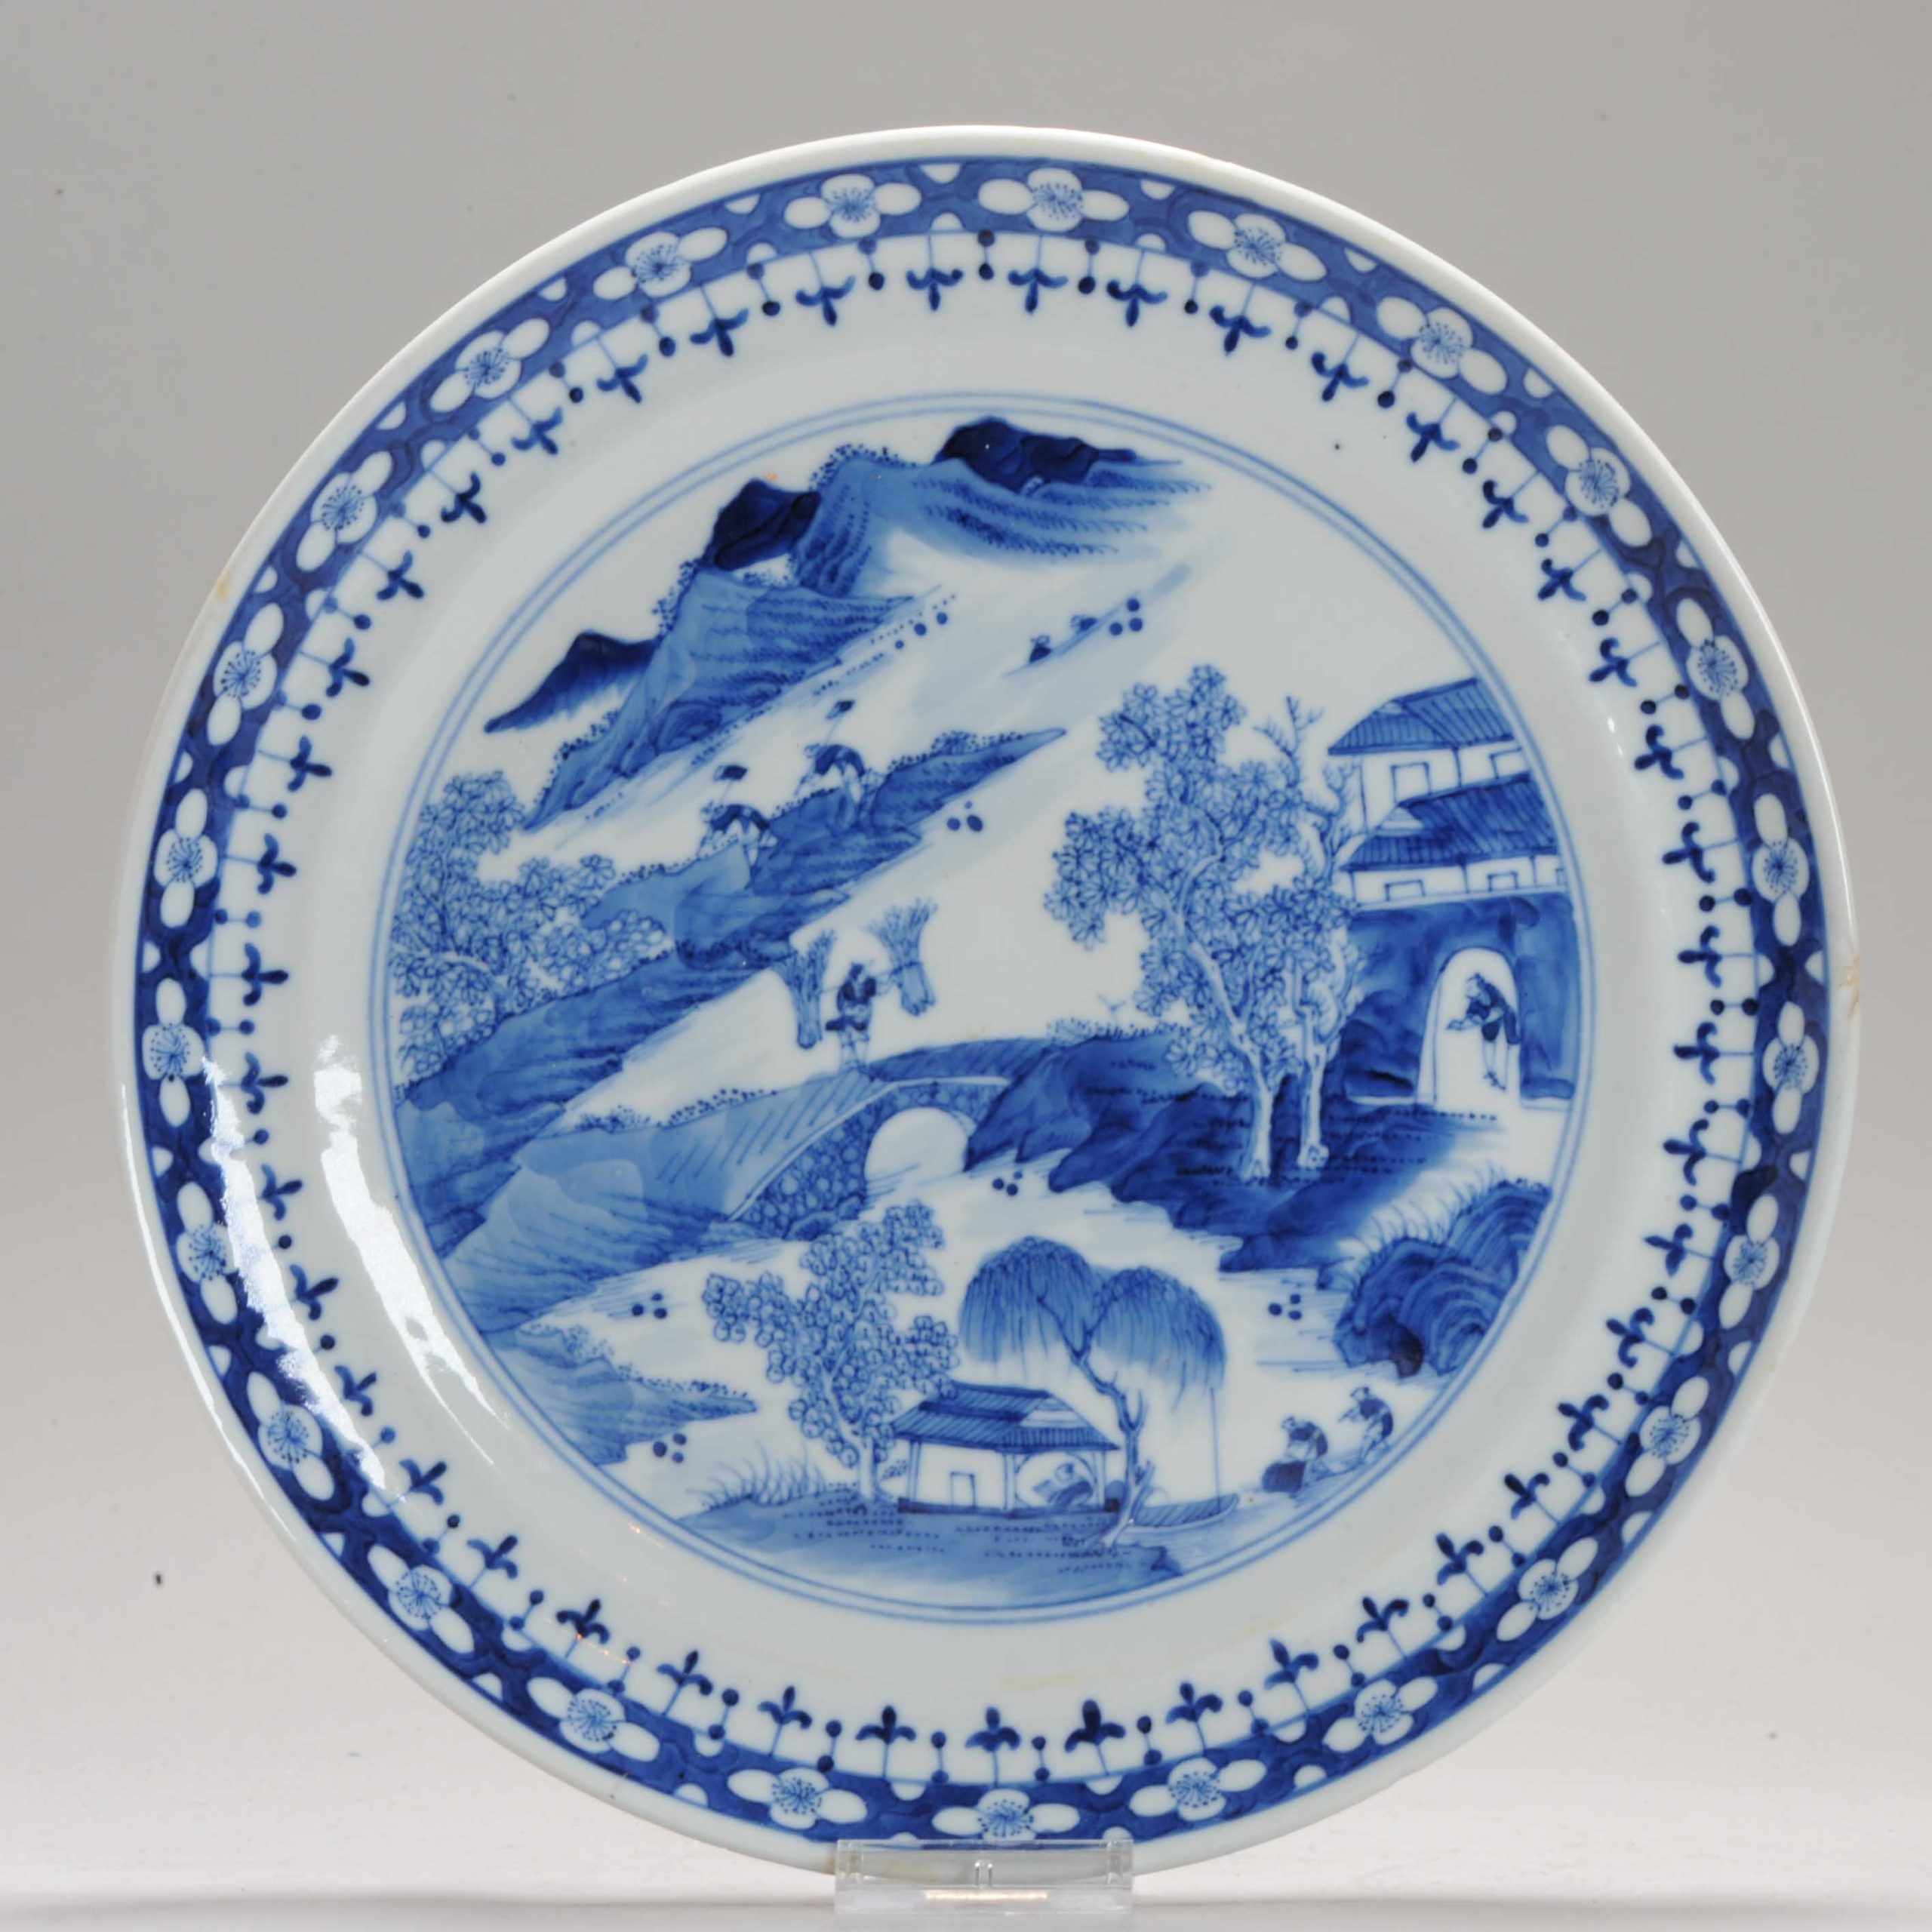 1179  A CANTON landscape plate with a lovely scene that is also seen on Bleu de Hue